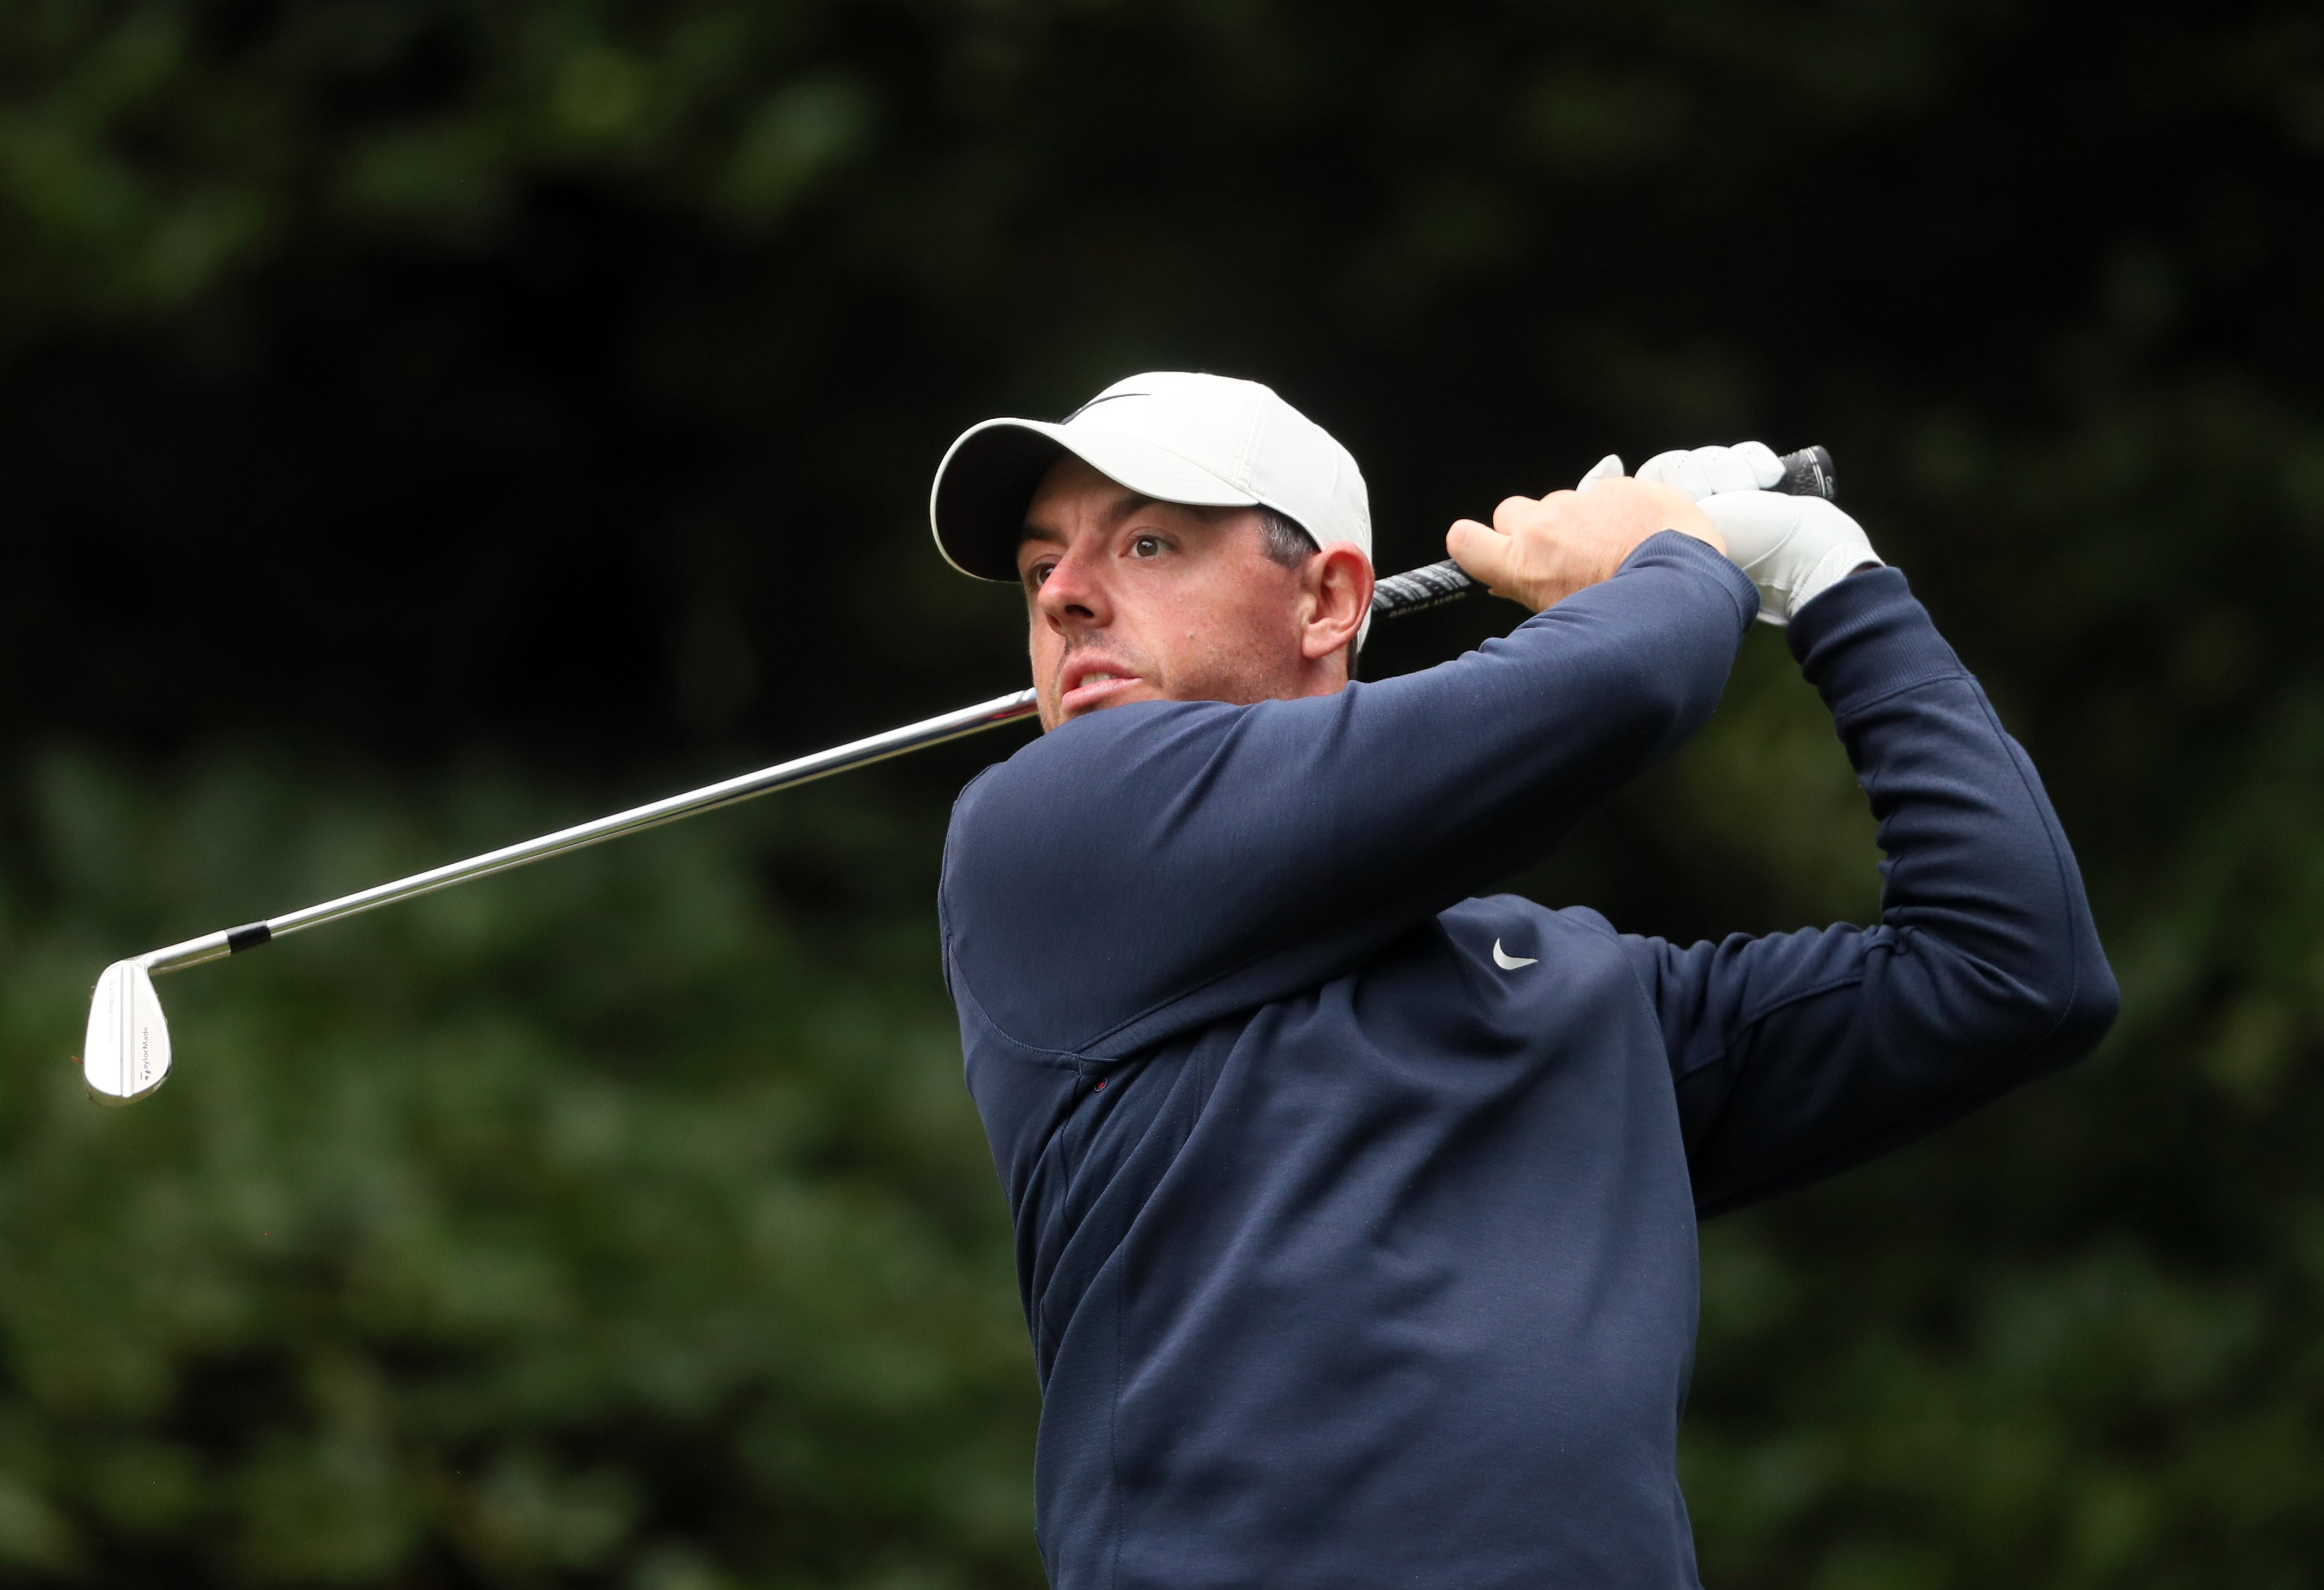 Rory McIlroy will look to shake off some rust in the abrdn Scottish Open